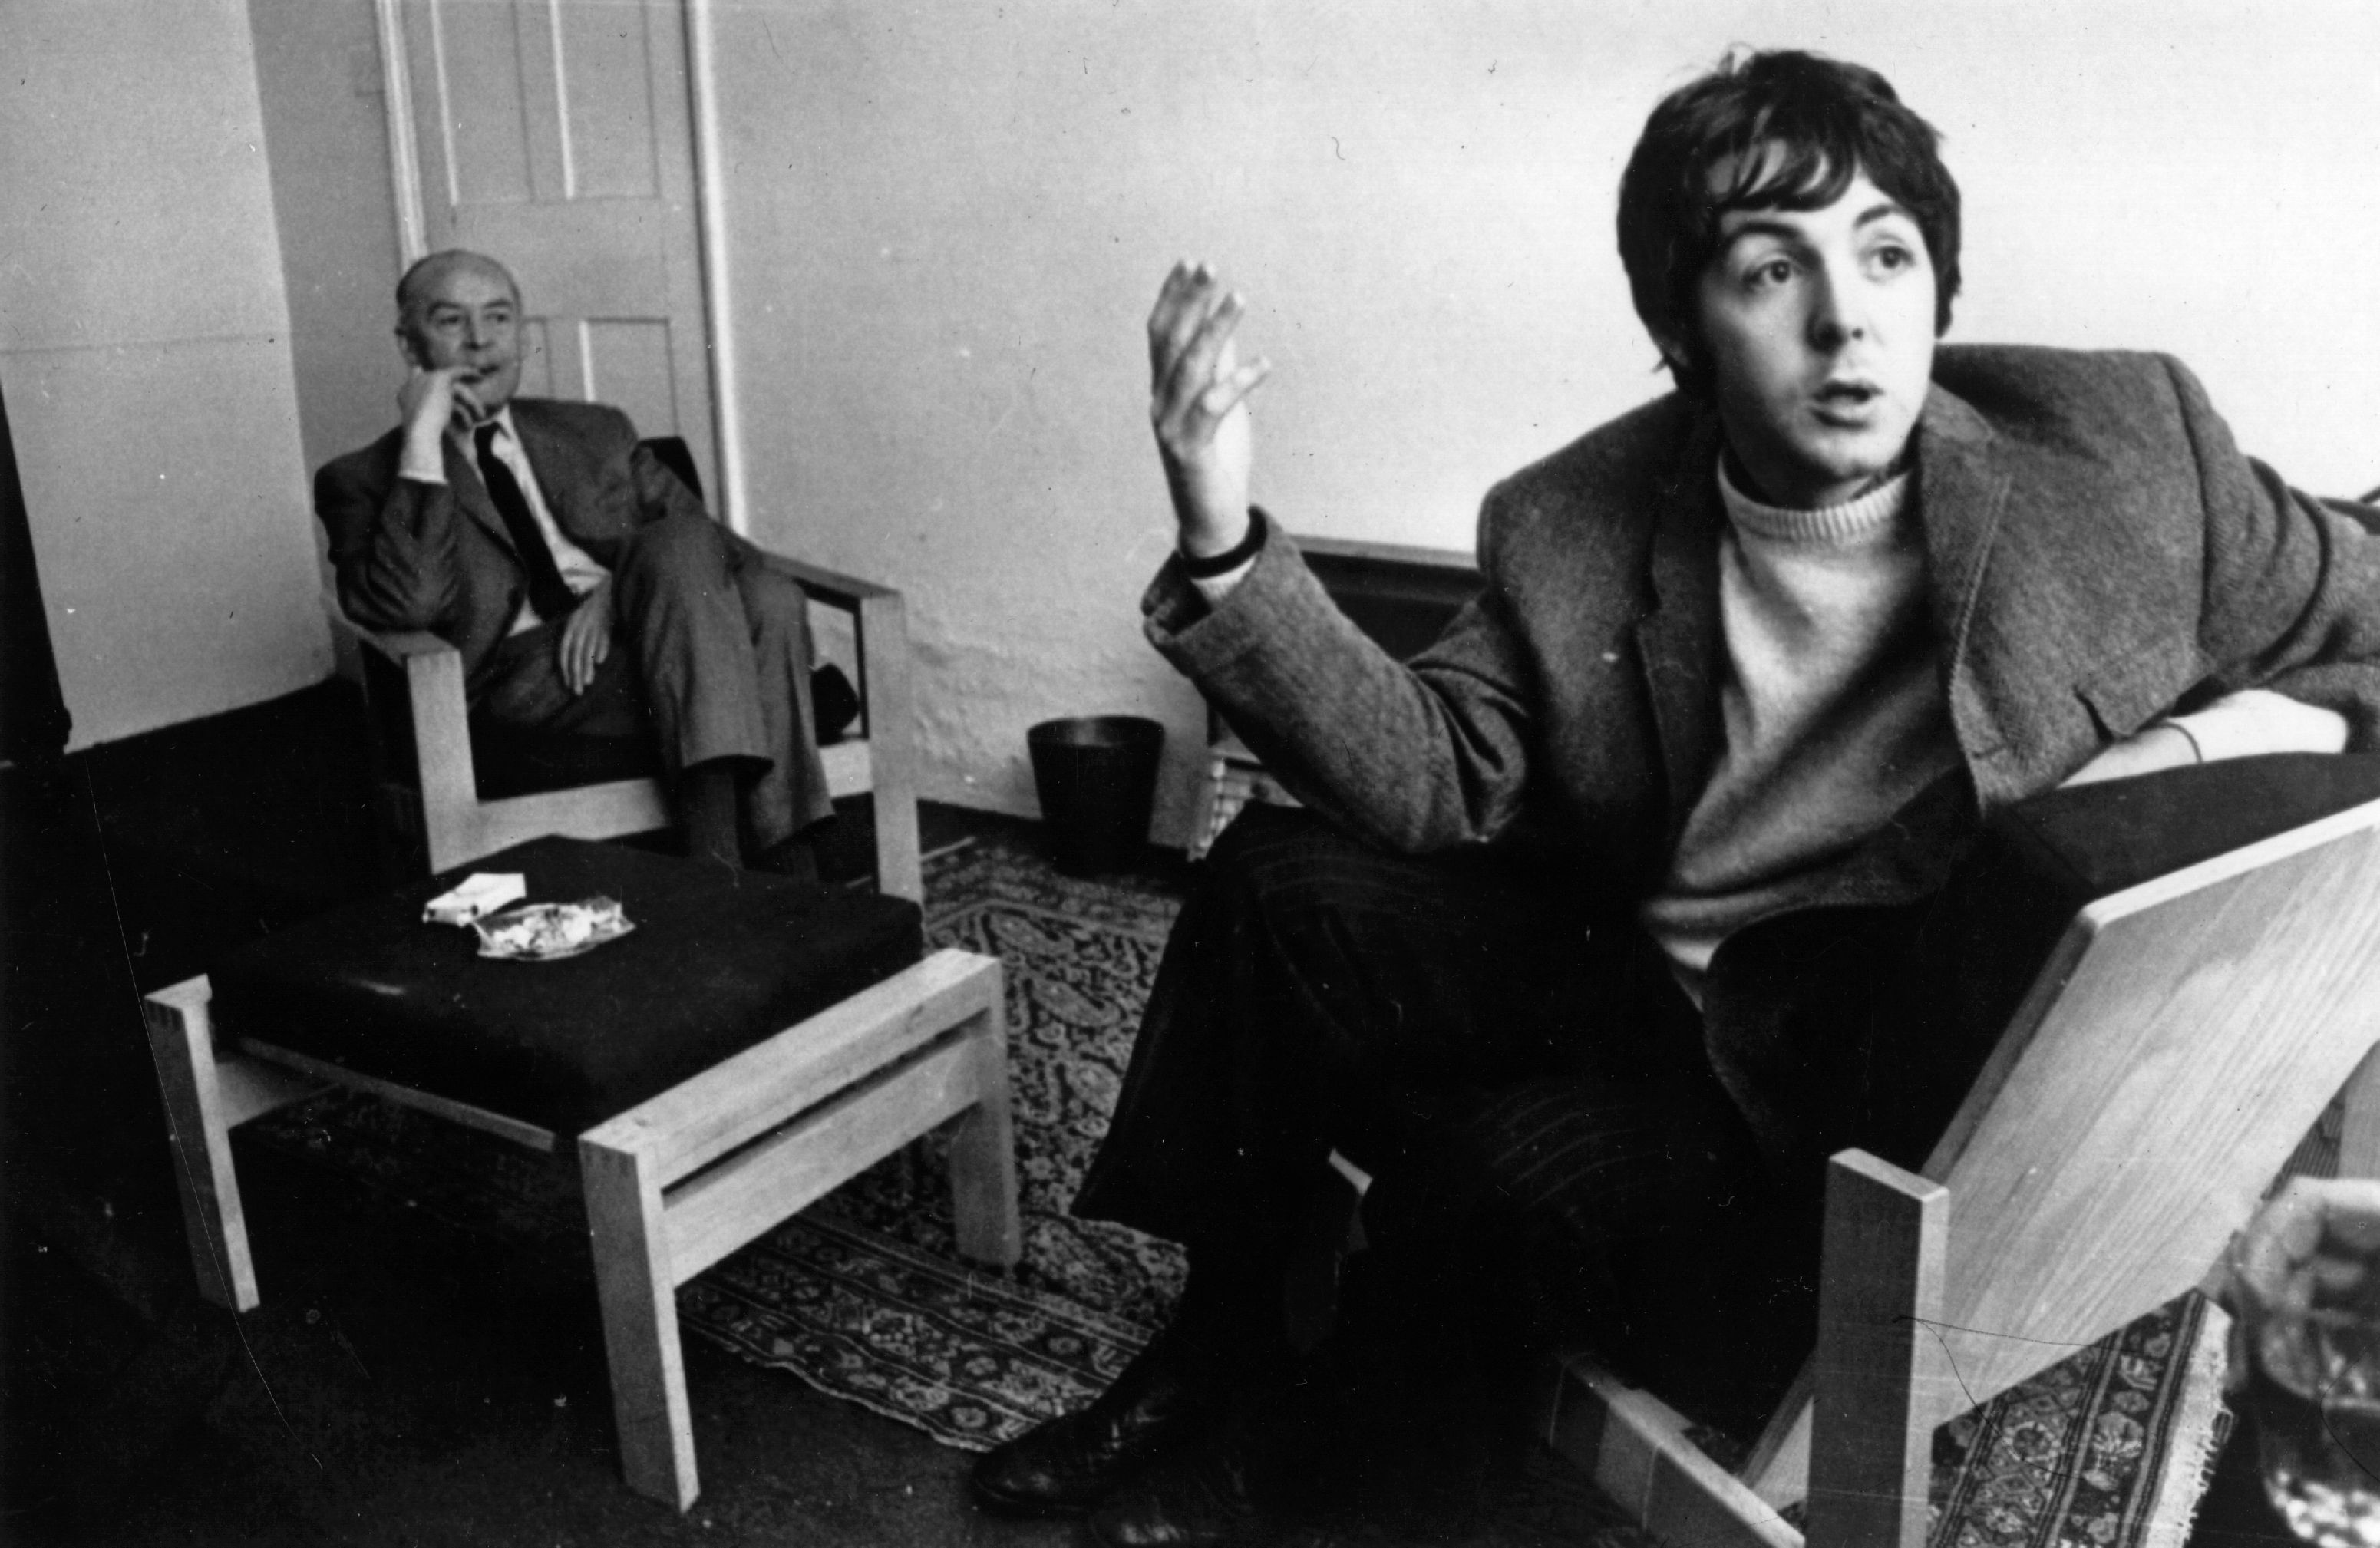  Paul McCartney and his father at home on 28th December 1967 | Source: Getty Images 